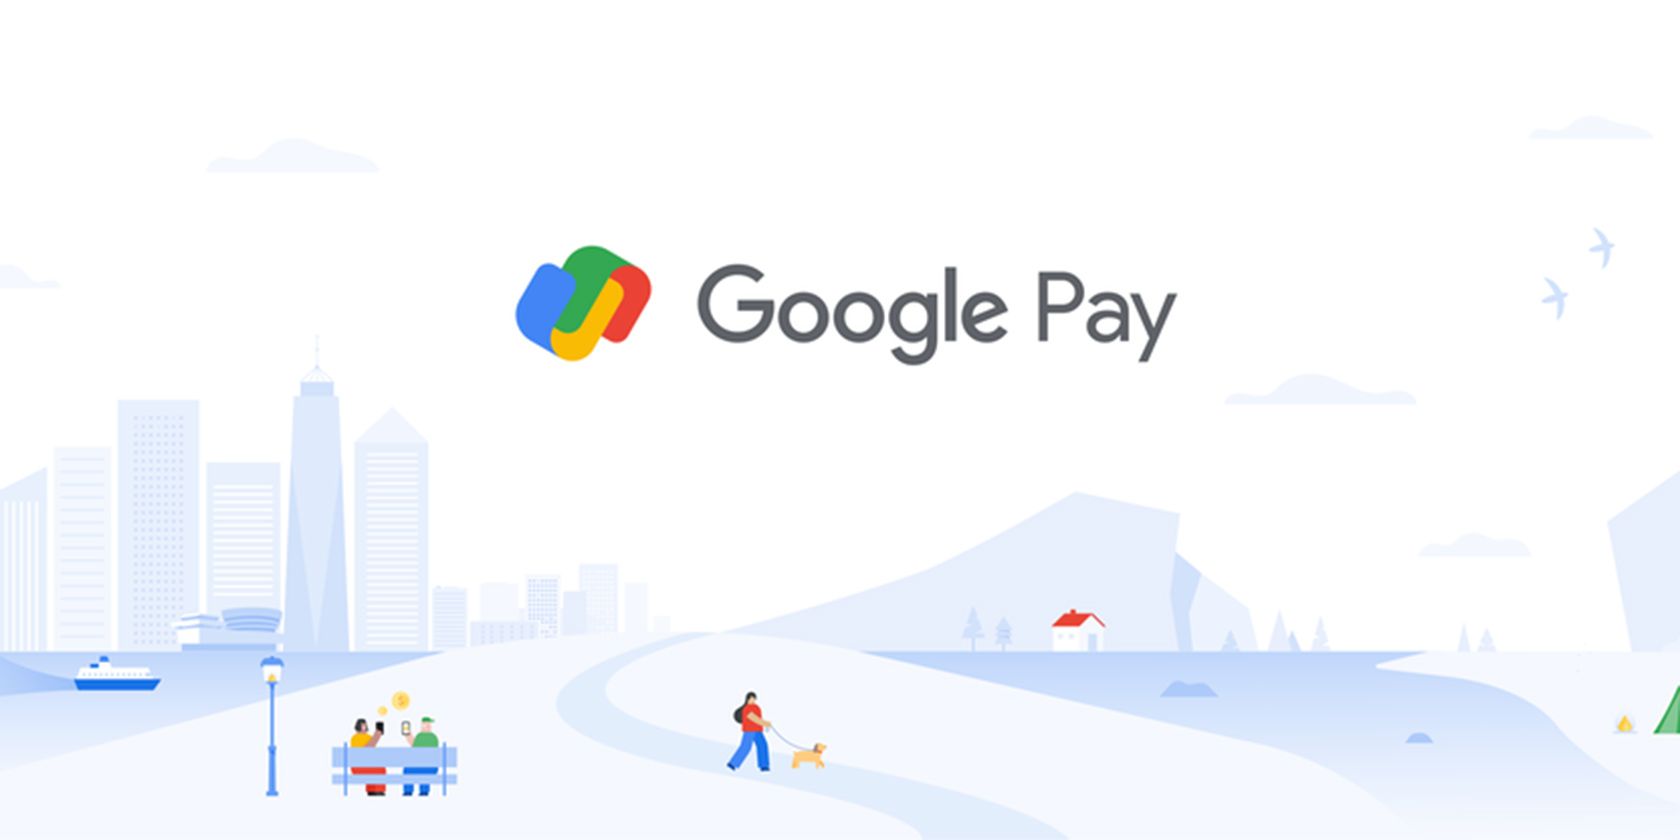 Google Pay featured